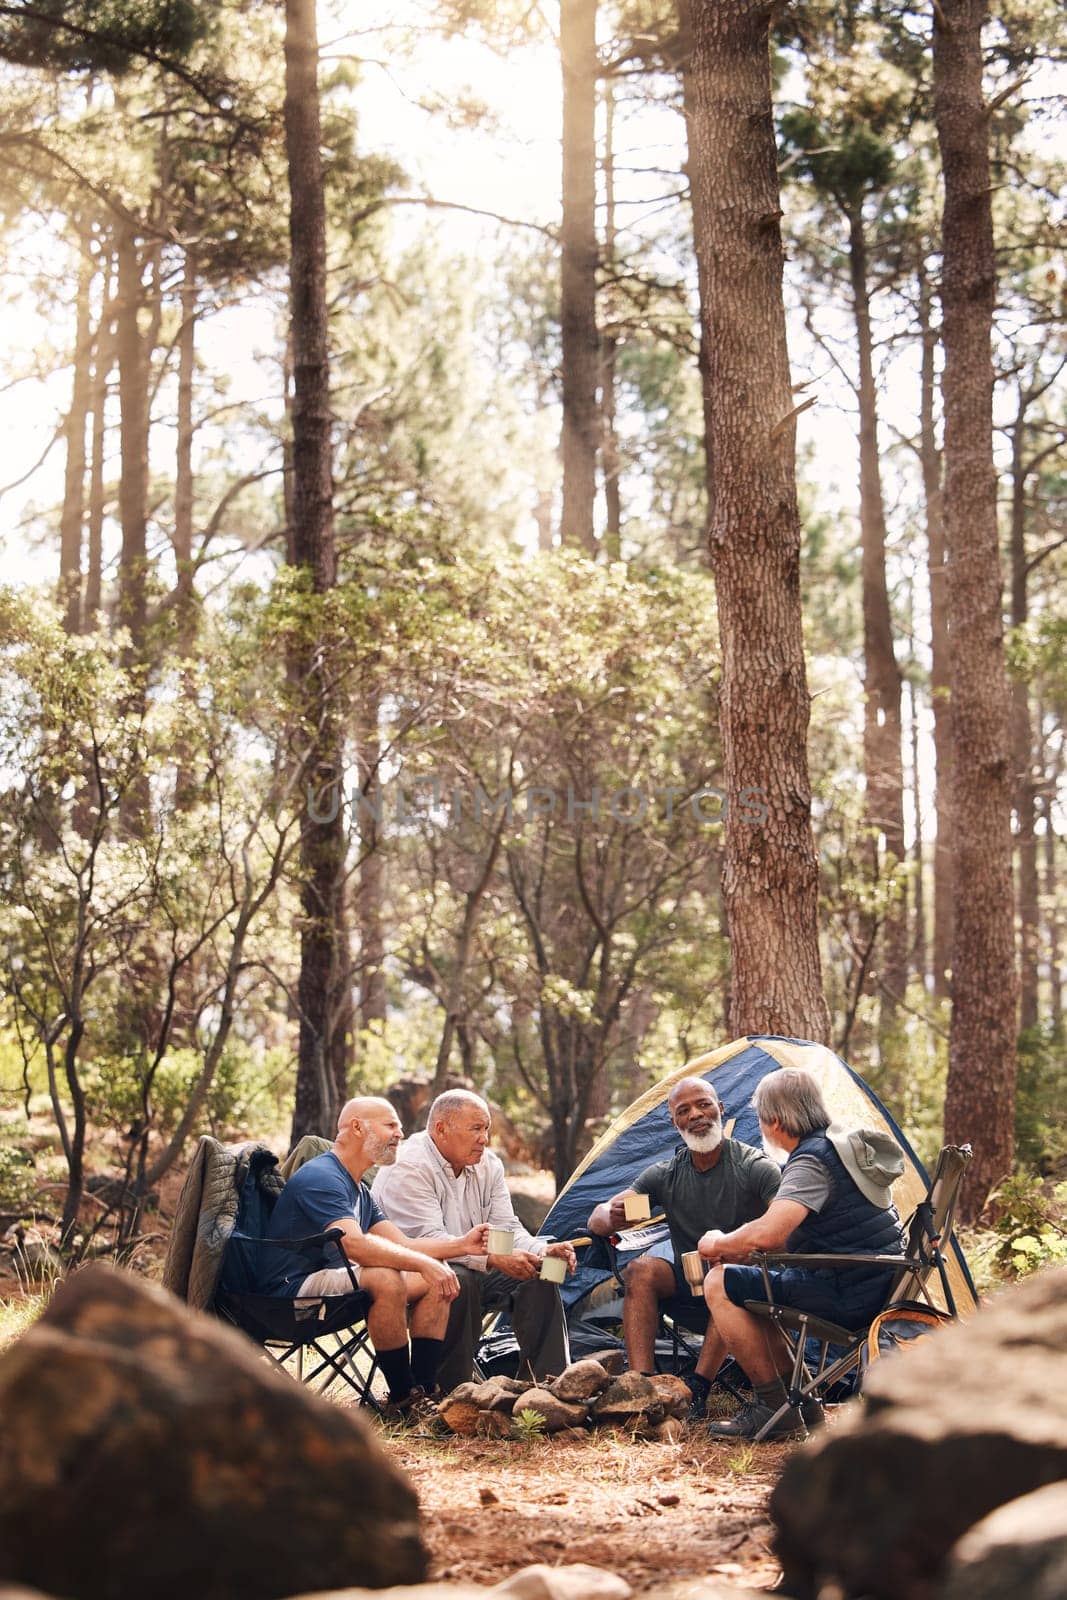 Man, people and camping in nature for travel, adventure or summer vacation together with chairs and tent in forest. Group of men relaxing and talking enjoying camp out by tall green trees in outdoors.